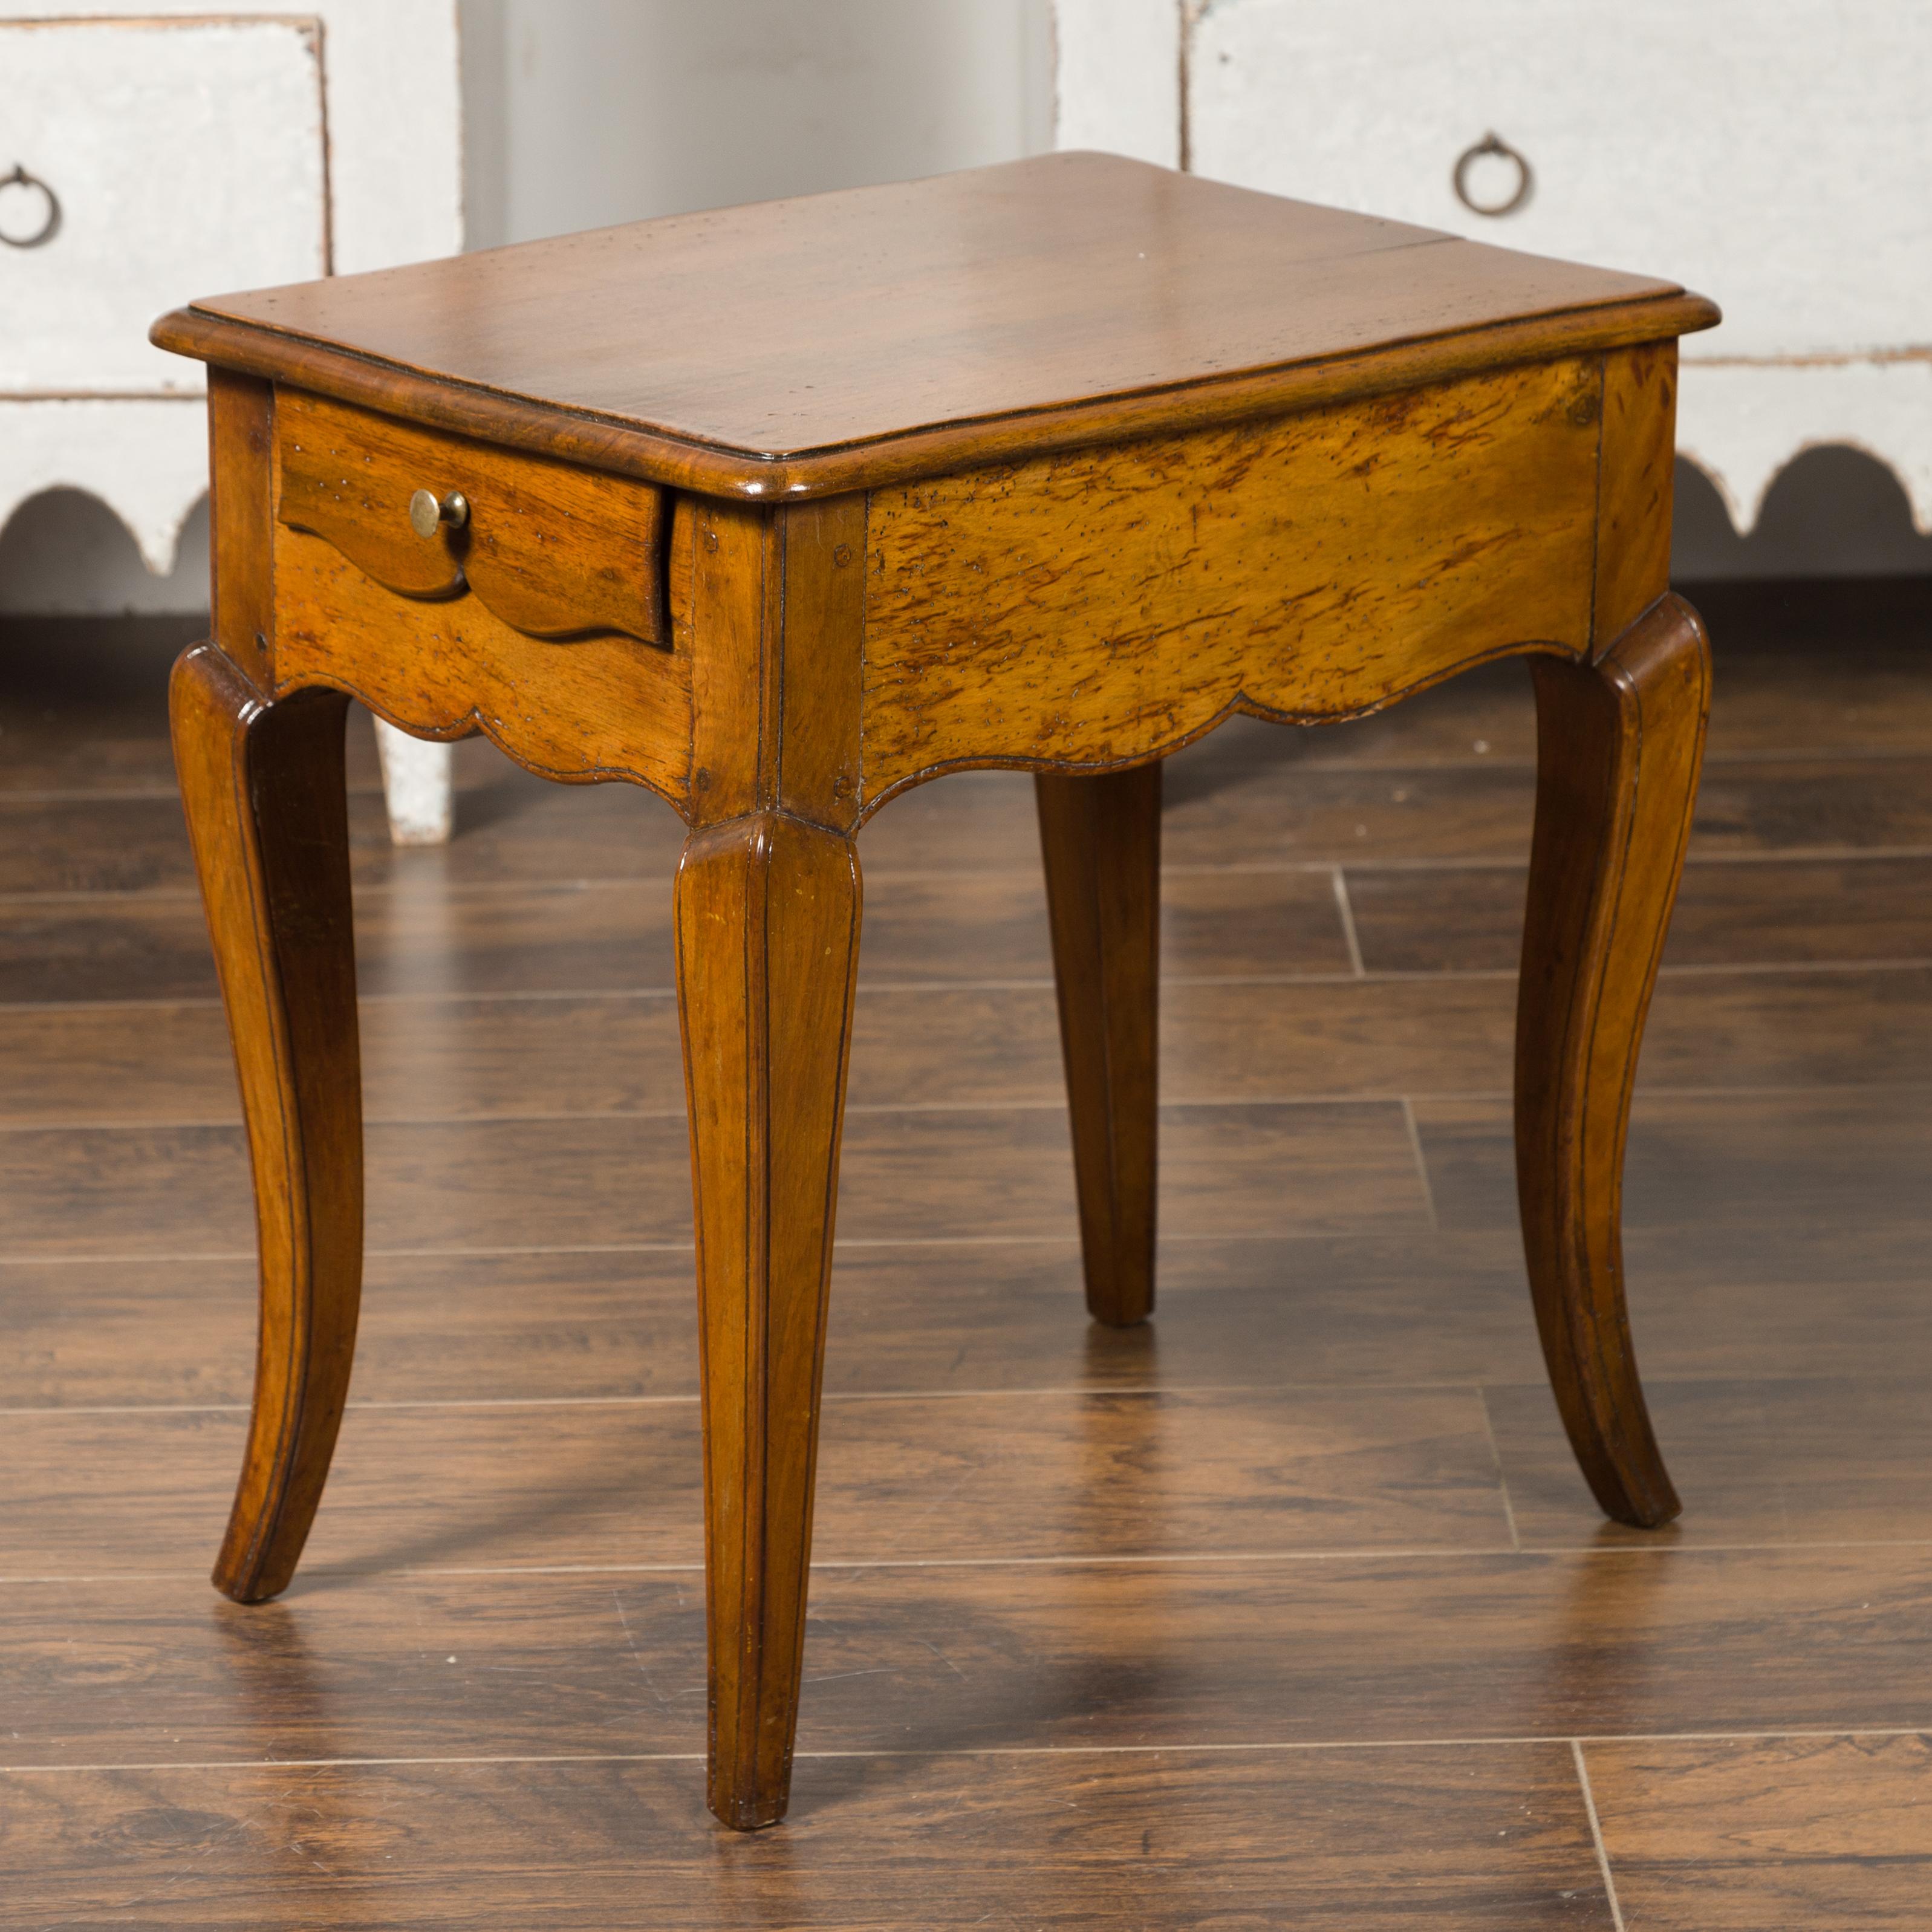 A French Louis XV style walnut side table from the mid-20th century, with long single drawer, cabriole legs and carved apron. Born in France during the midcentury period, this table features the stylistic characteristics of the Louis XV era. A